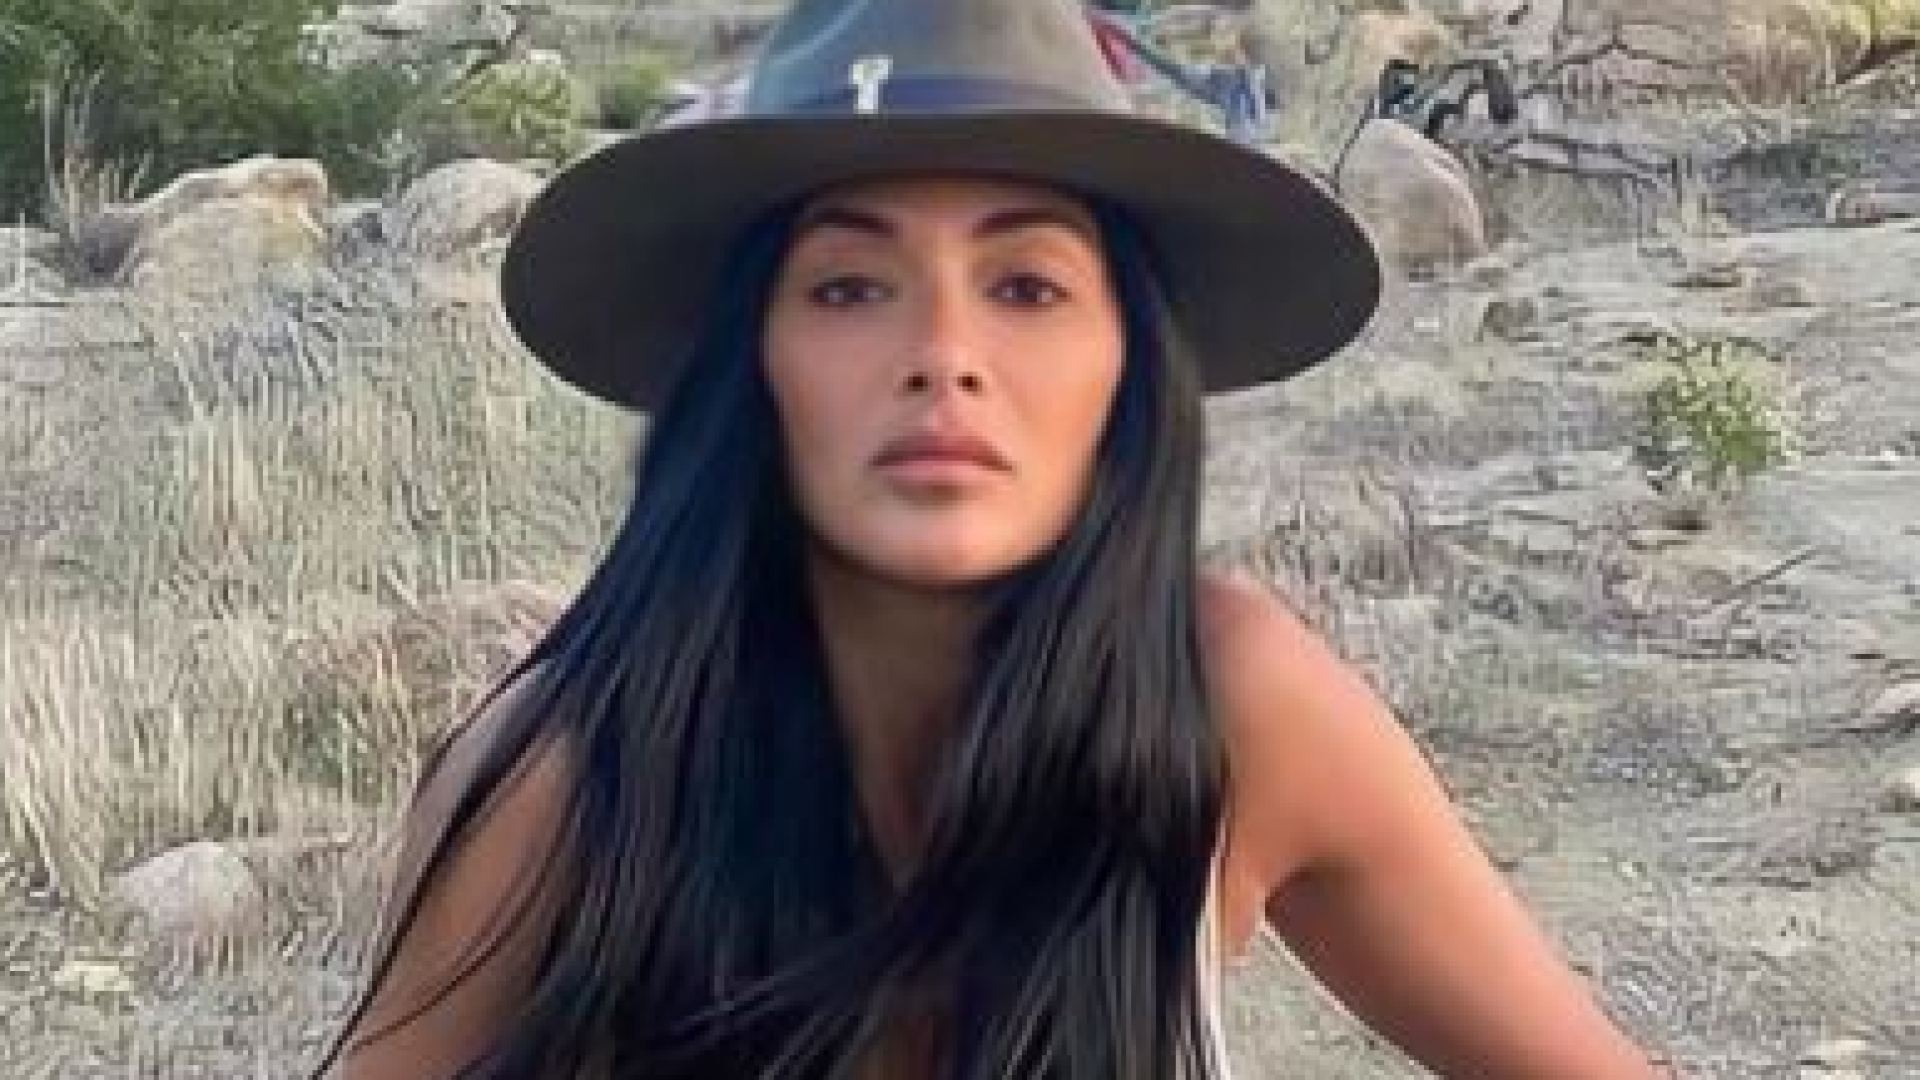 Nicole Scherzinger shows off her incredible figure in tiny shorts in the desert